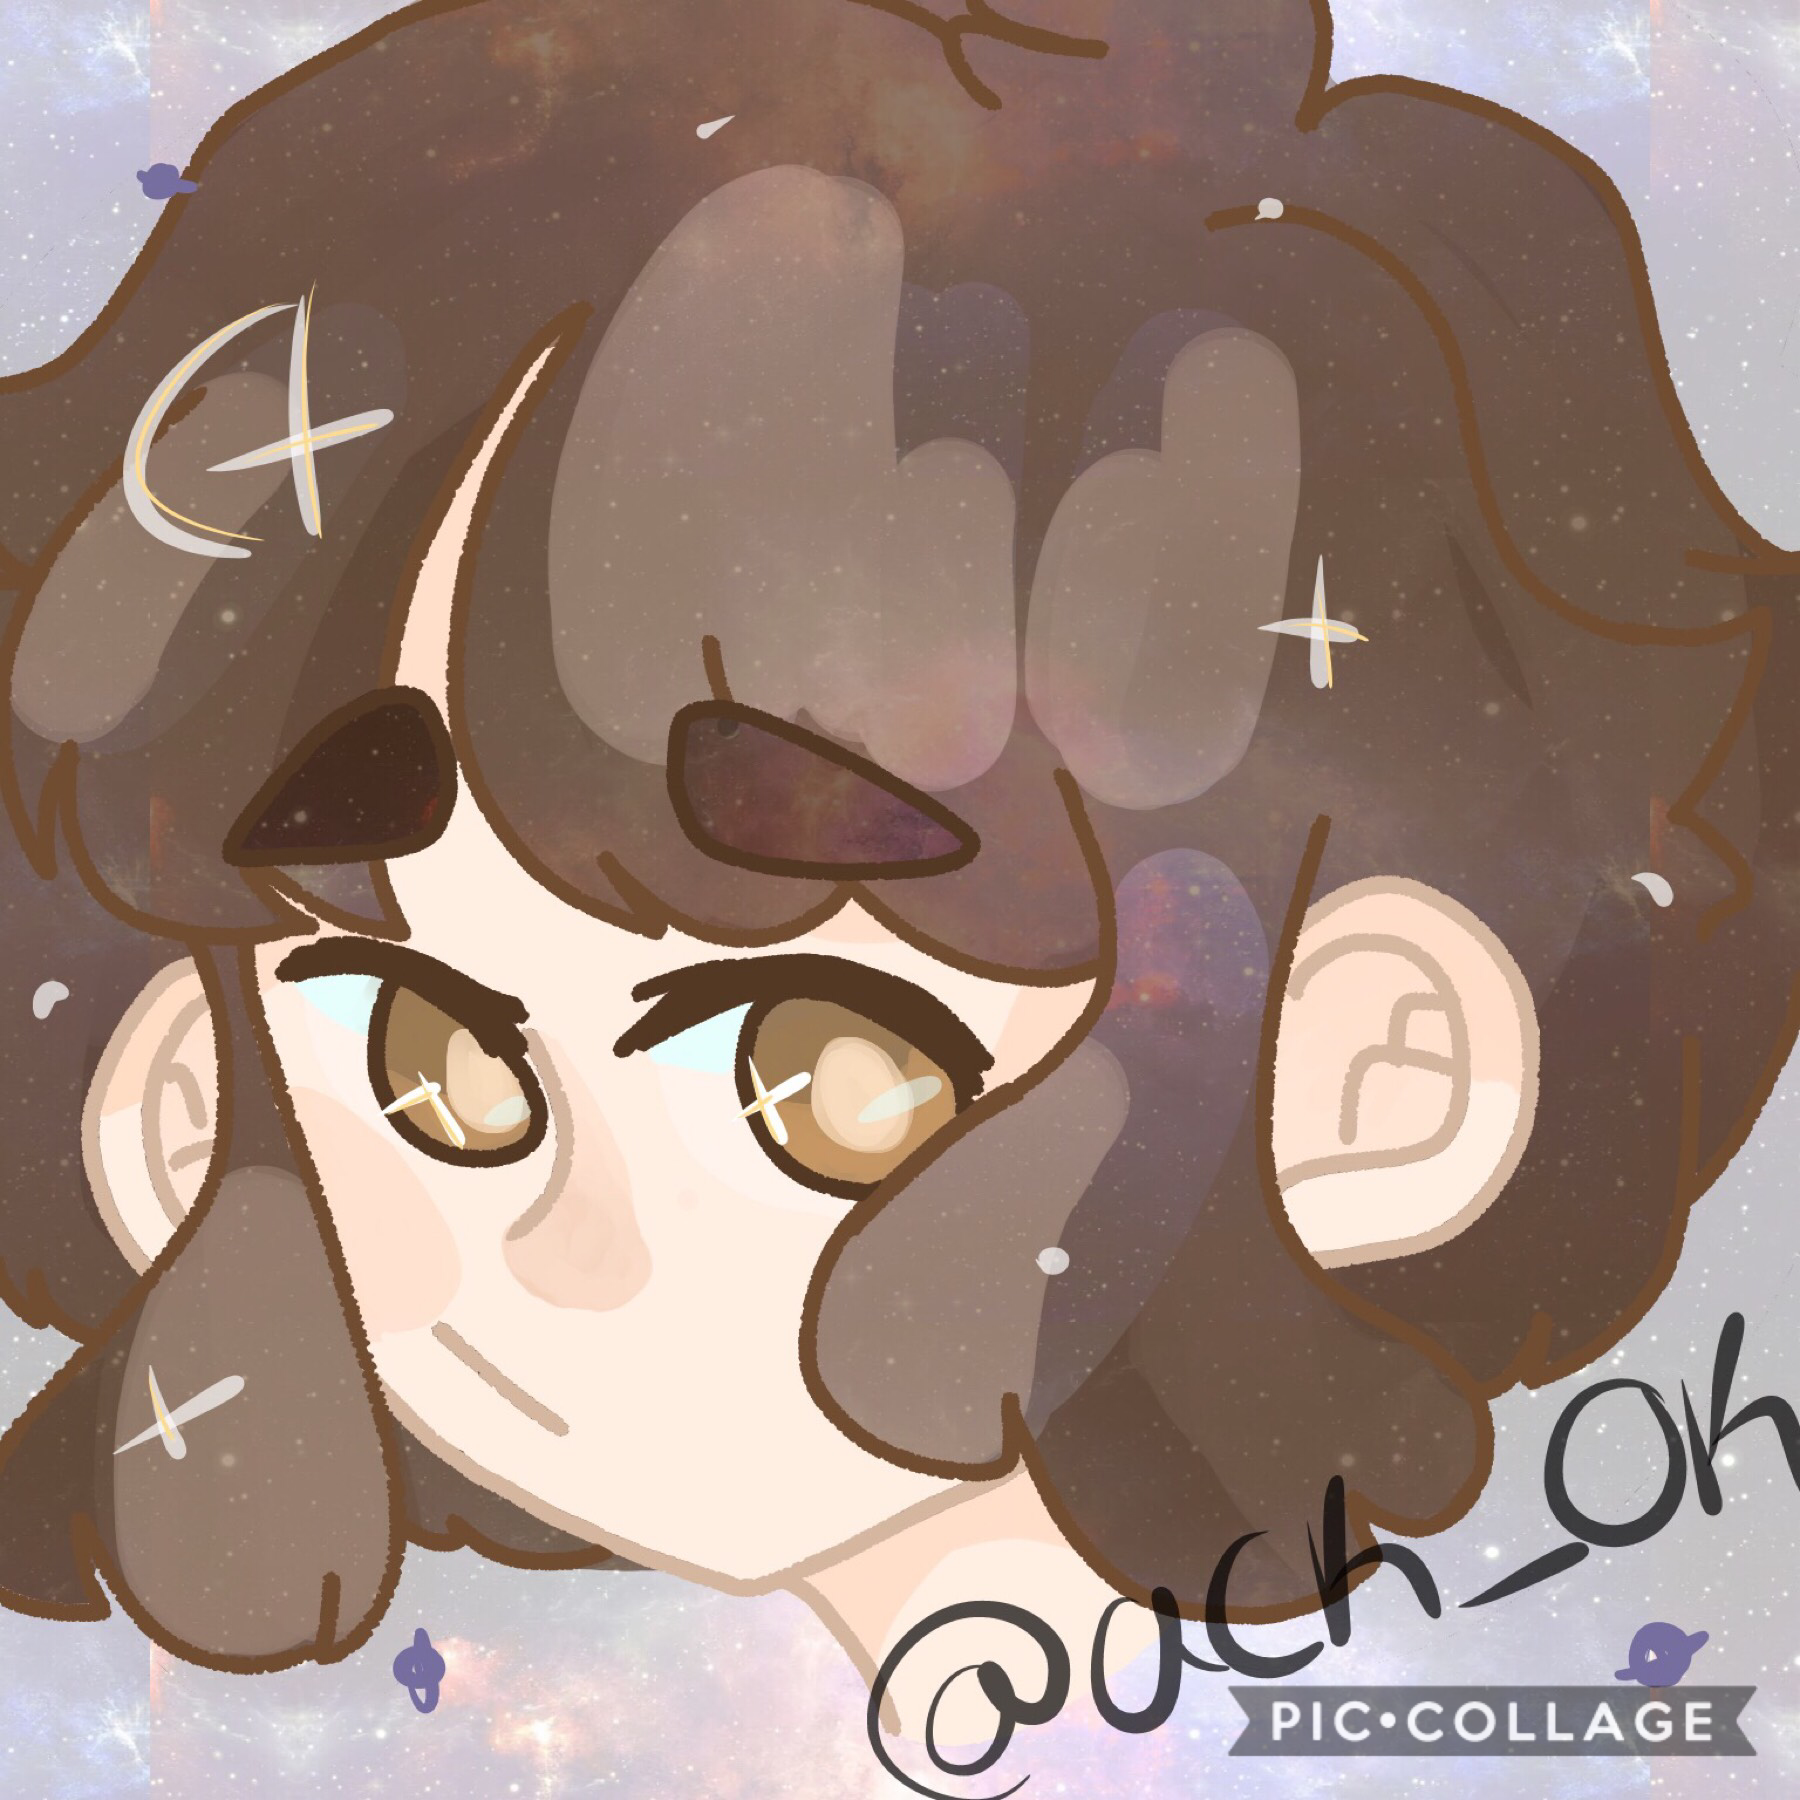 I haven’t done a digital piece in a while, so I made something like an icon thingy? 